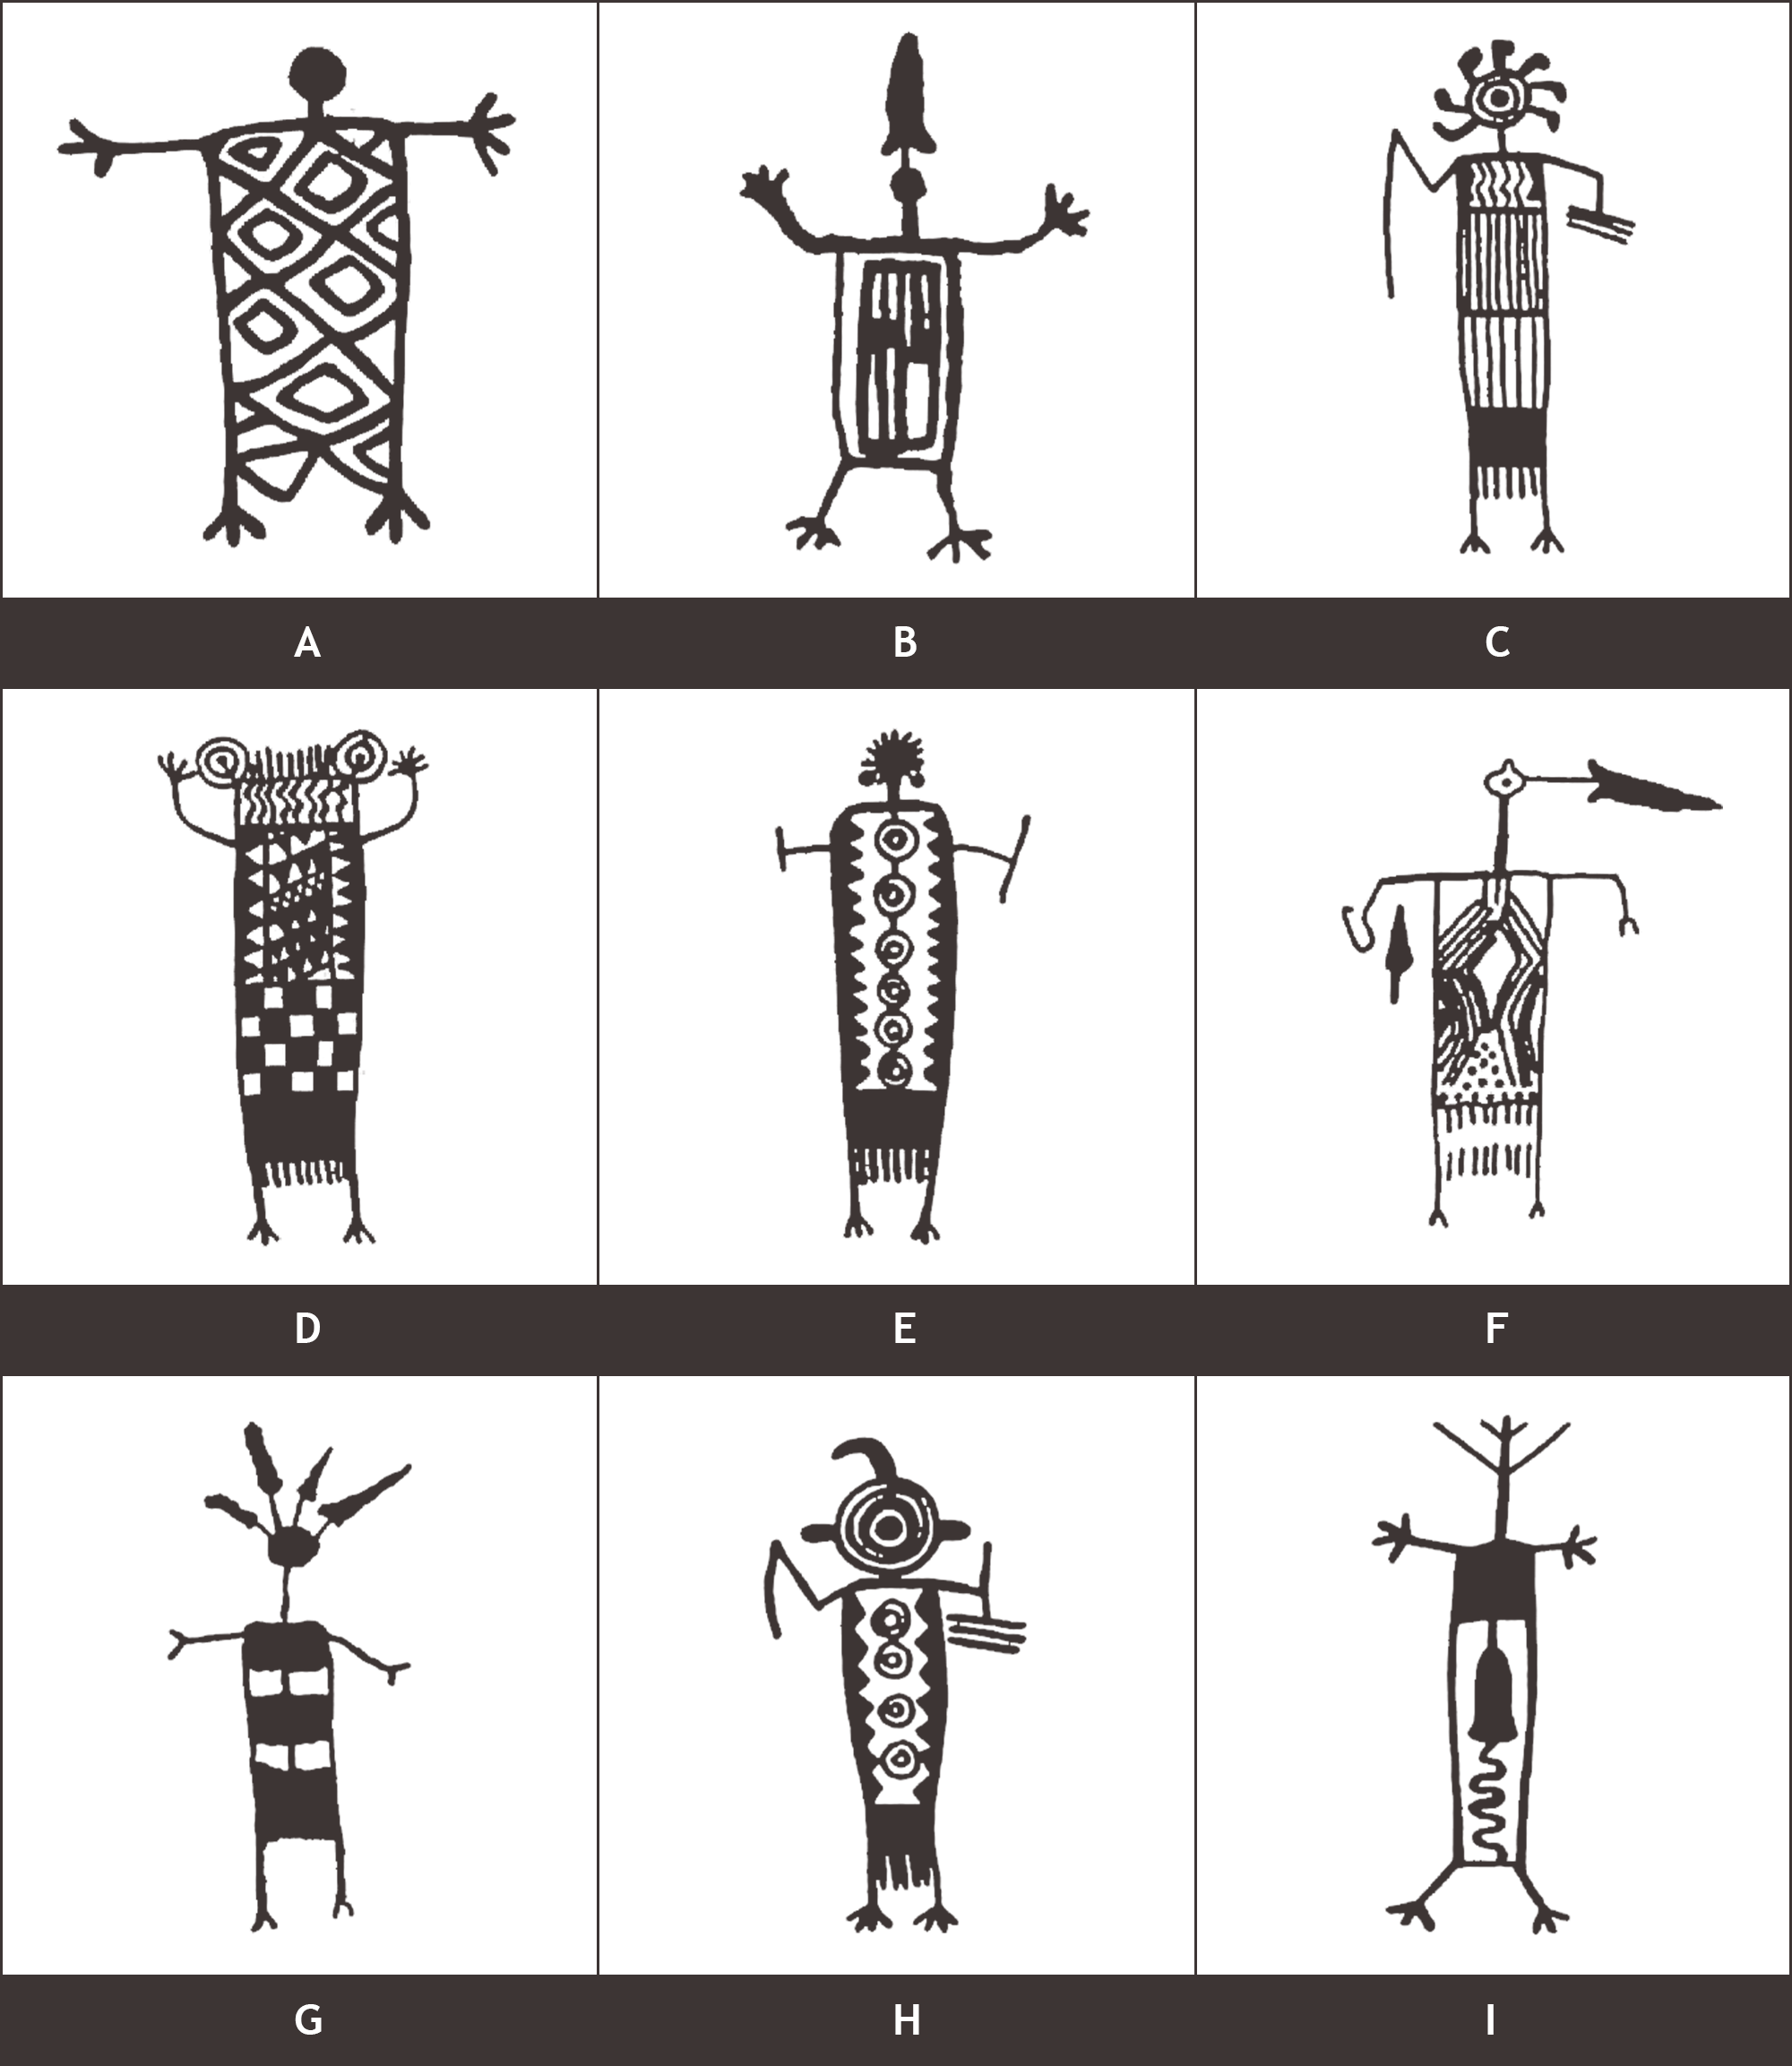 Patterned body anthropomorphic figures